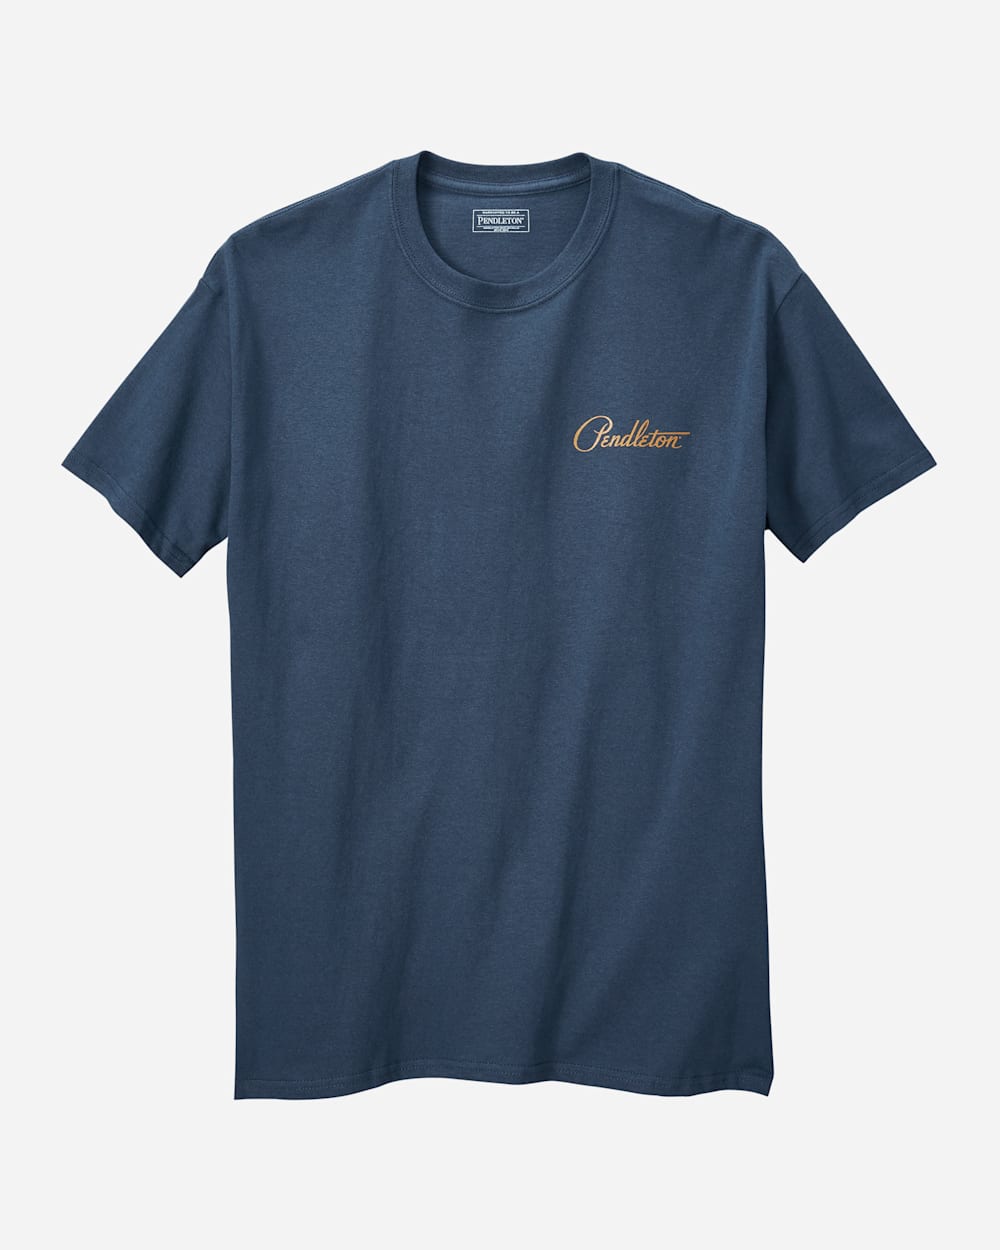 MEN'S GRAND CANYON PARK TEE IN NAVY image number 2